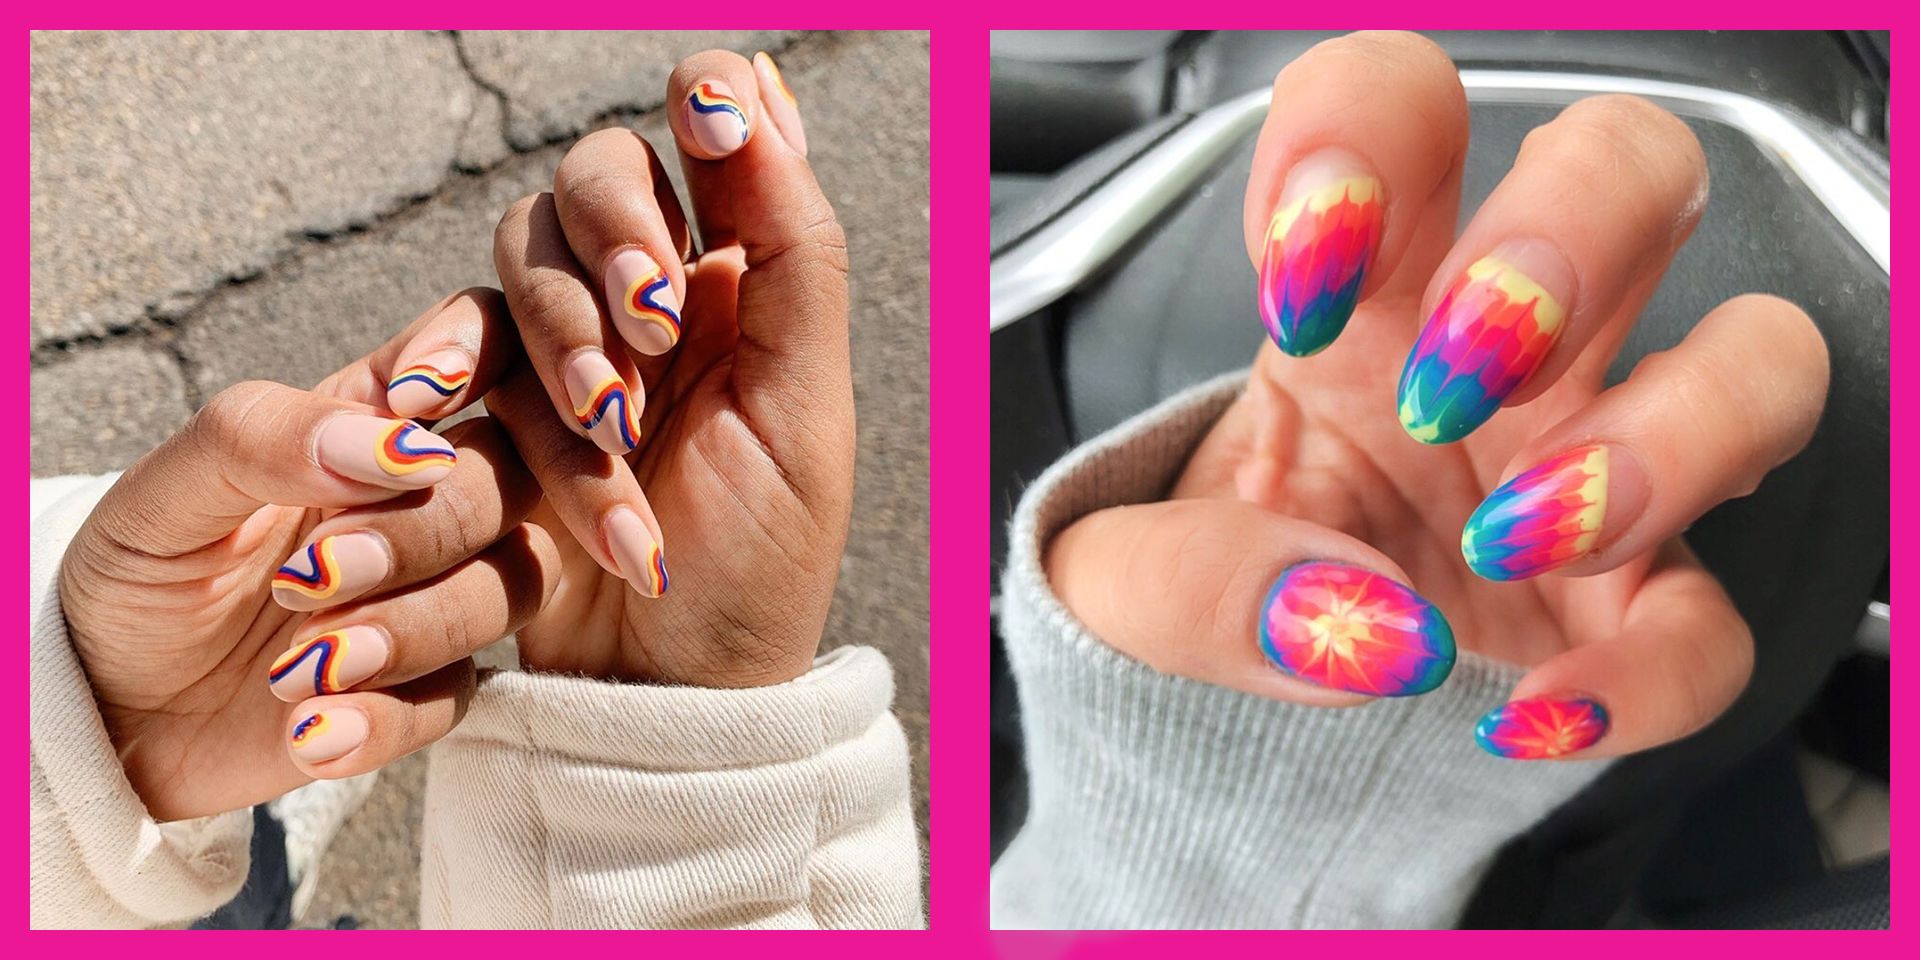 nail designs pictures